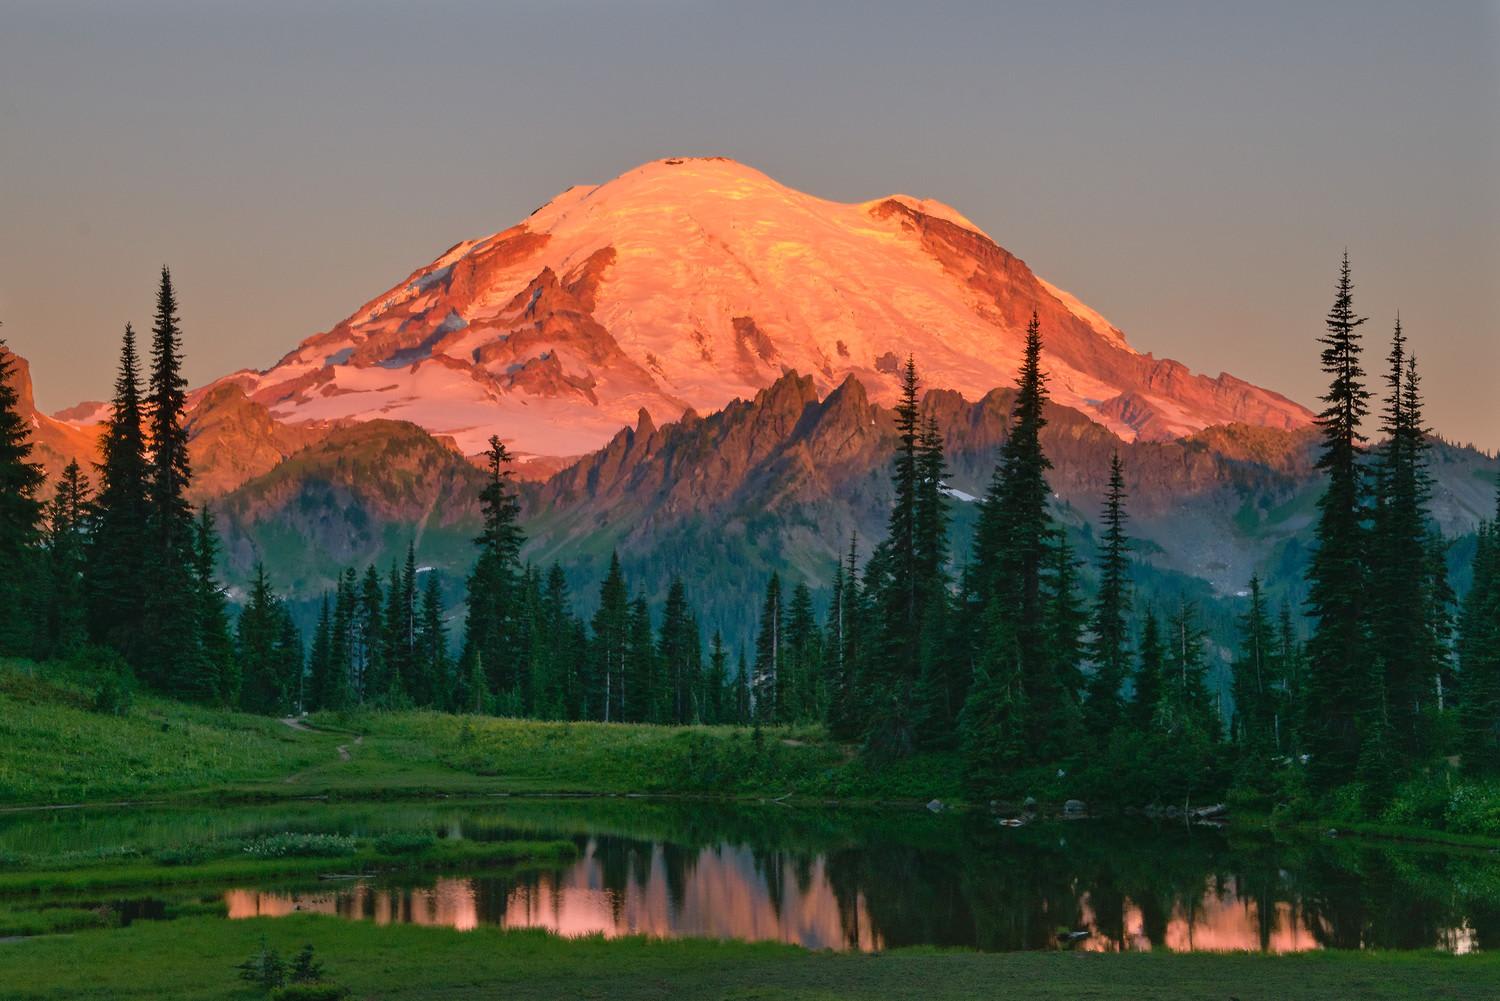 One of the most incredible sunrises in my life, and I didn't even look at the sun. Mt Rainier